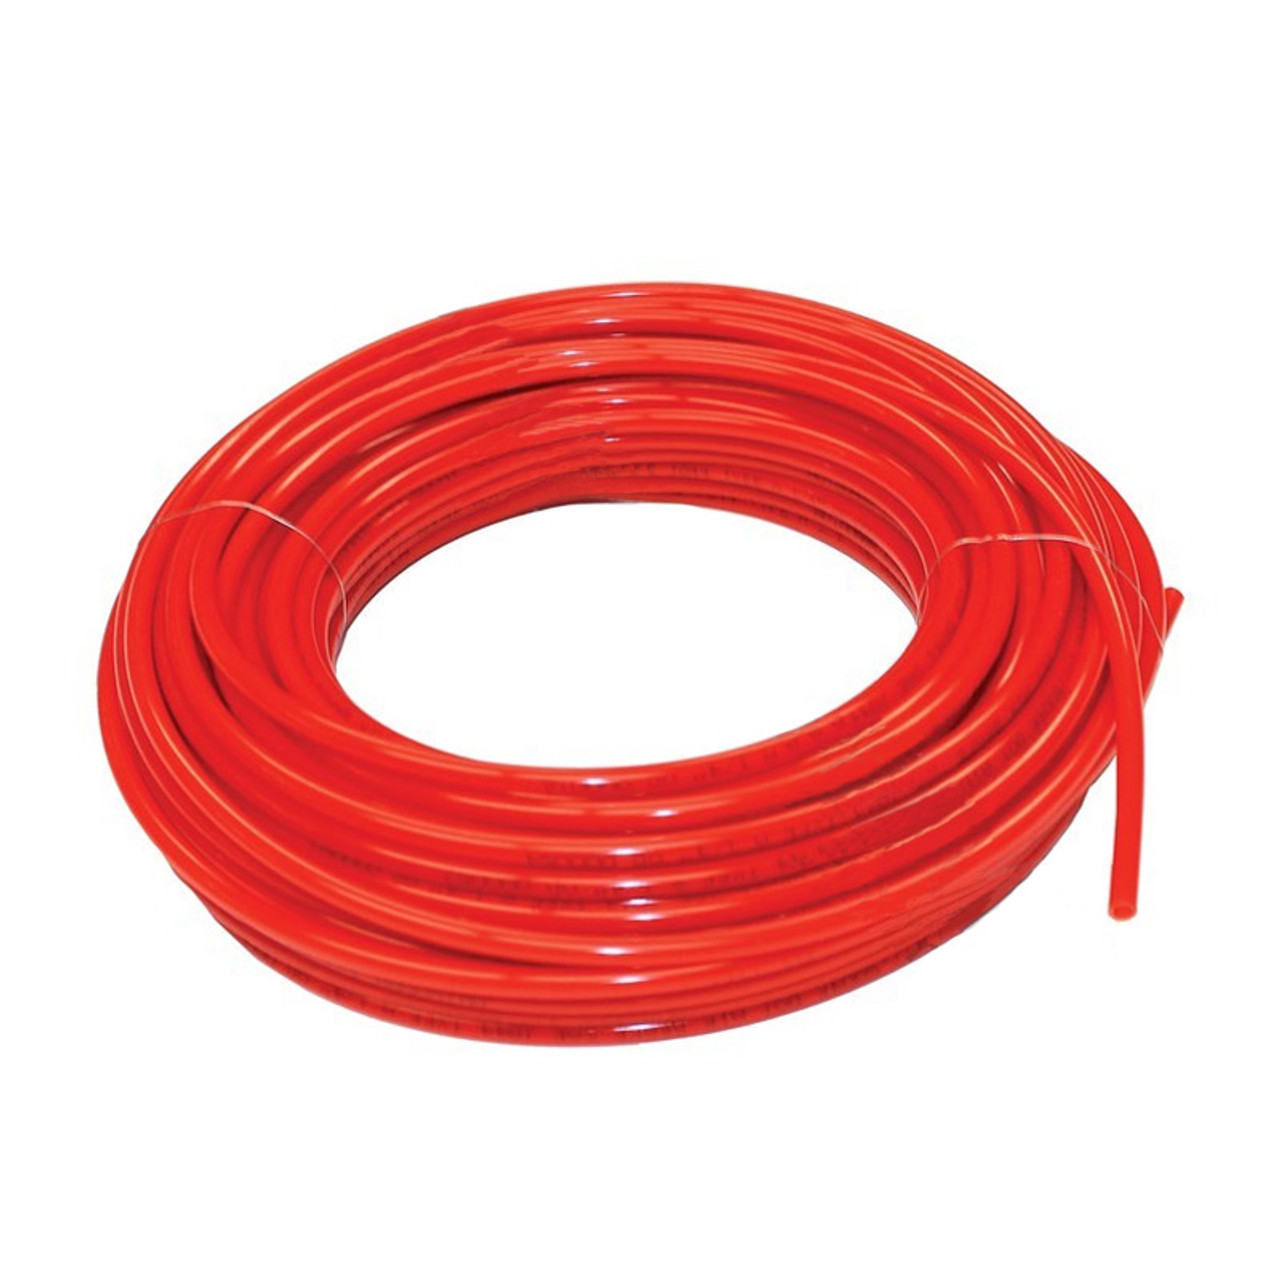 1/4" Pneumatic Polyethylene Tubing for Push to Connect Fittings RED 15ft 